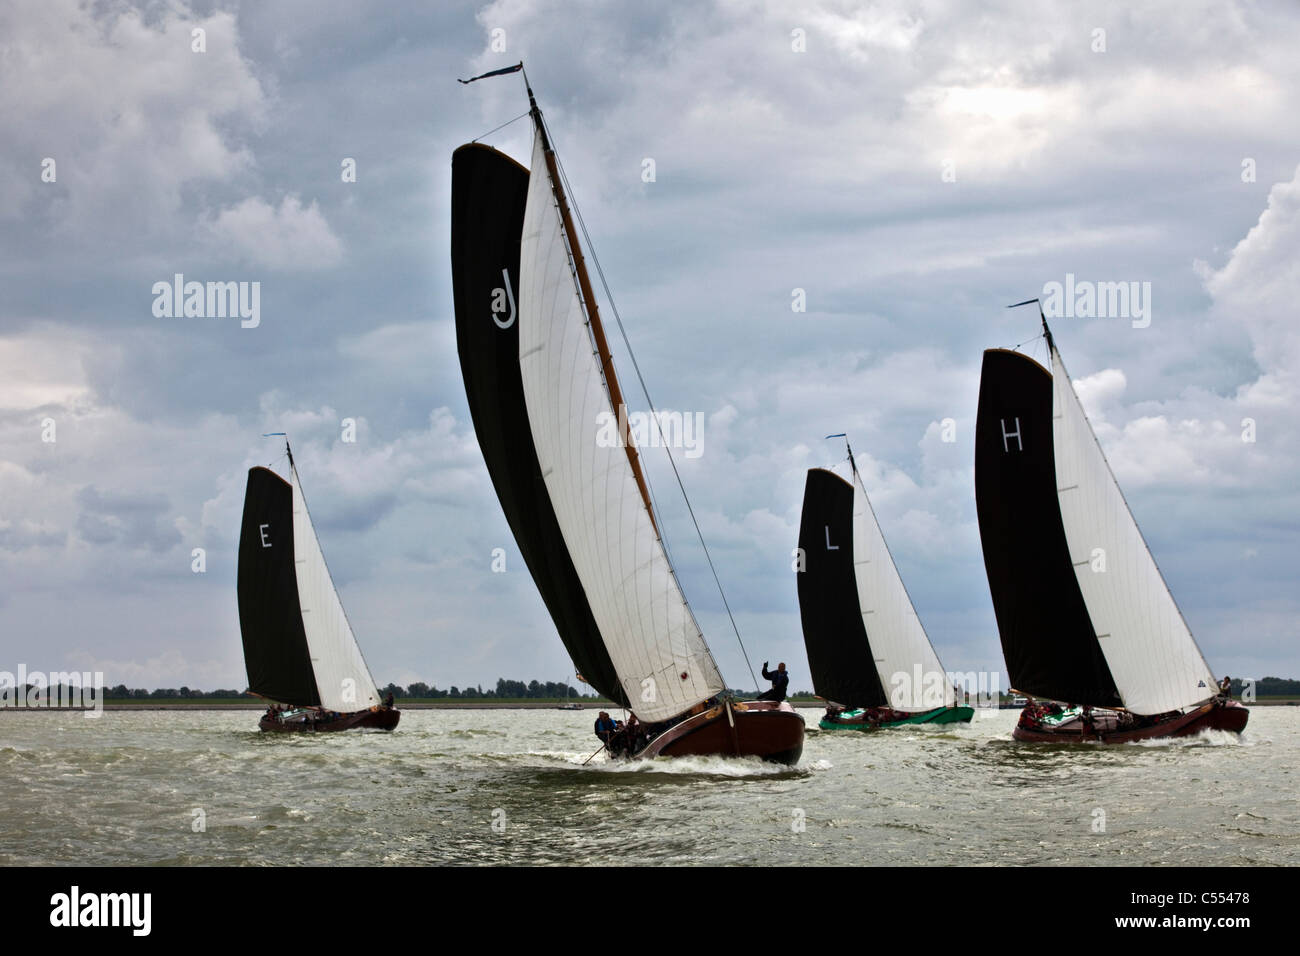 The Netherlands, Lemmer, Sailing races called Skutsjesilen, with traditional flat bottomed cargo boats called Skutsjes. Stock Photo